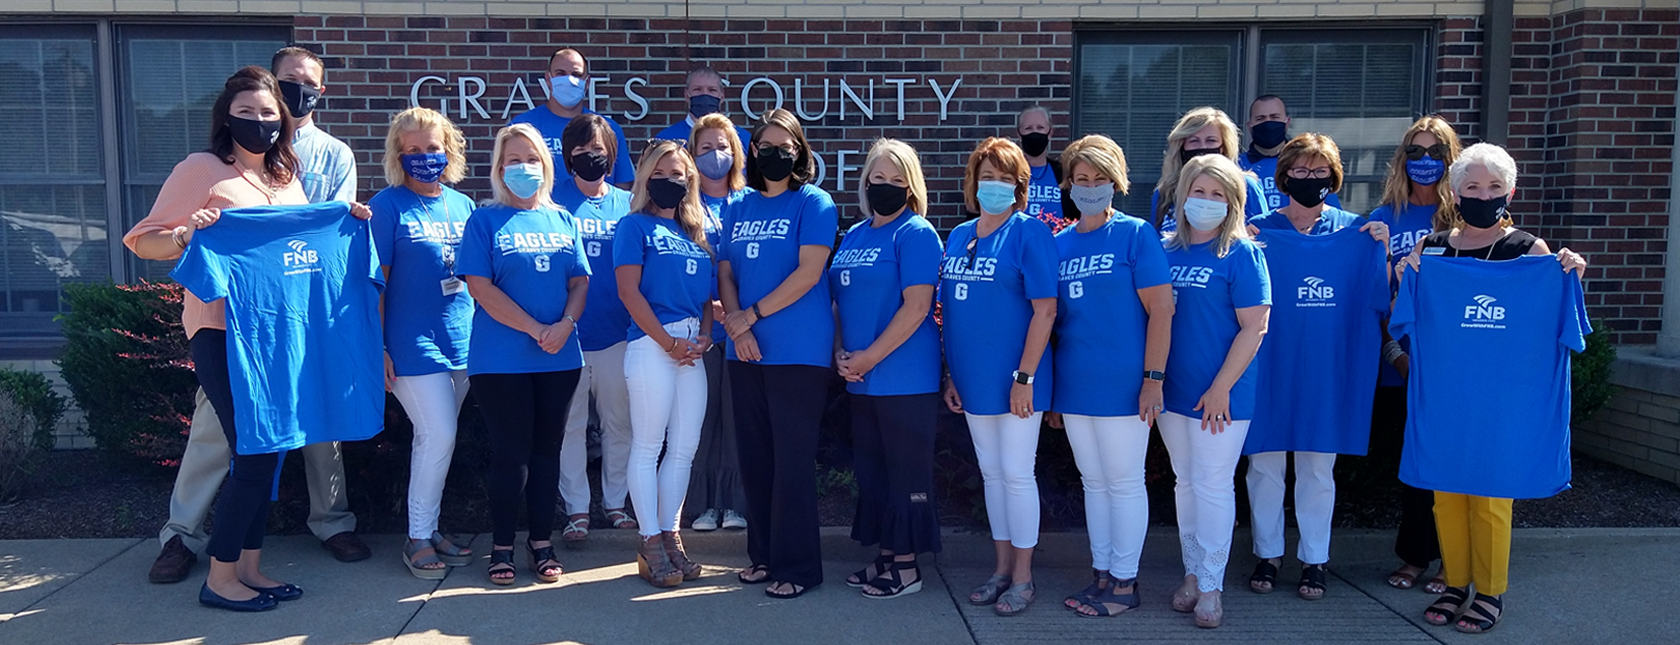 FNB Sponsors T-shirts for Graves County School Employees